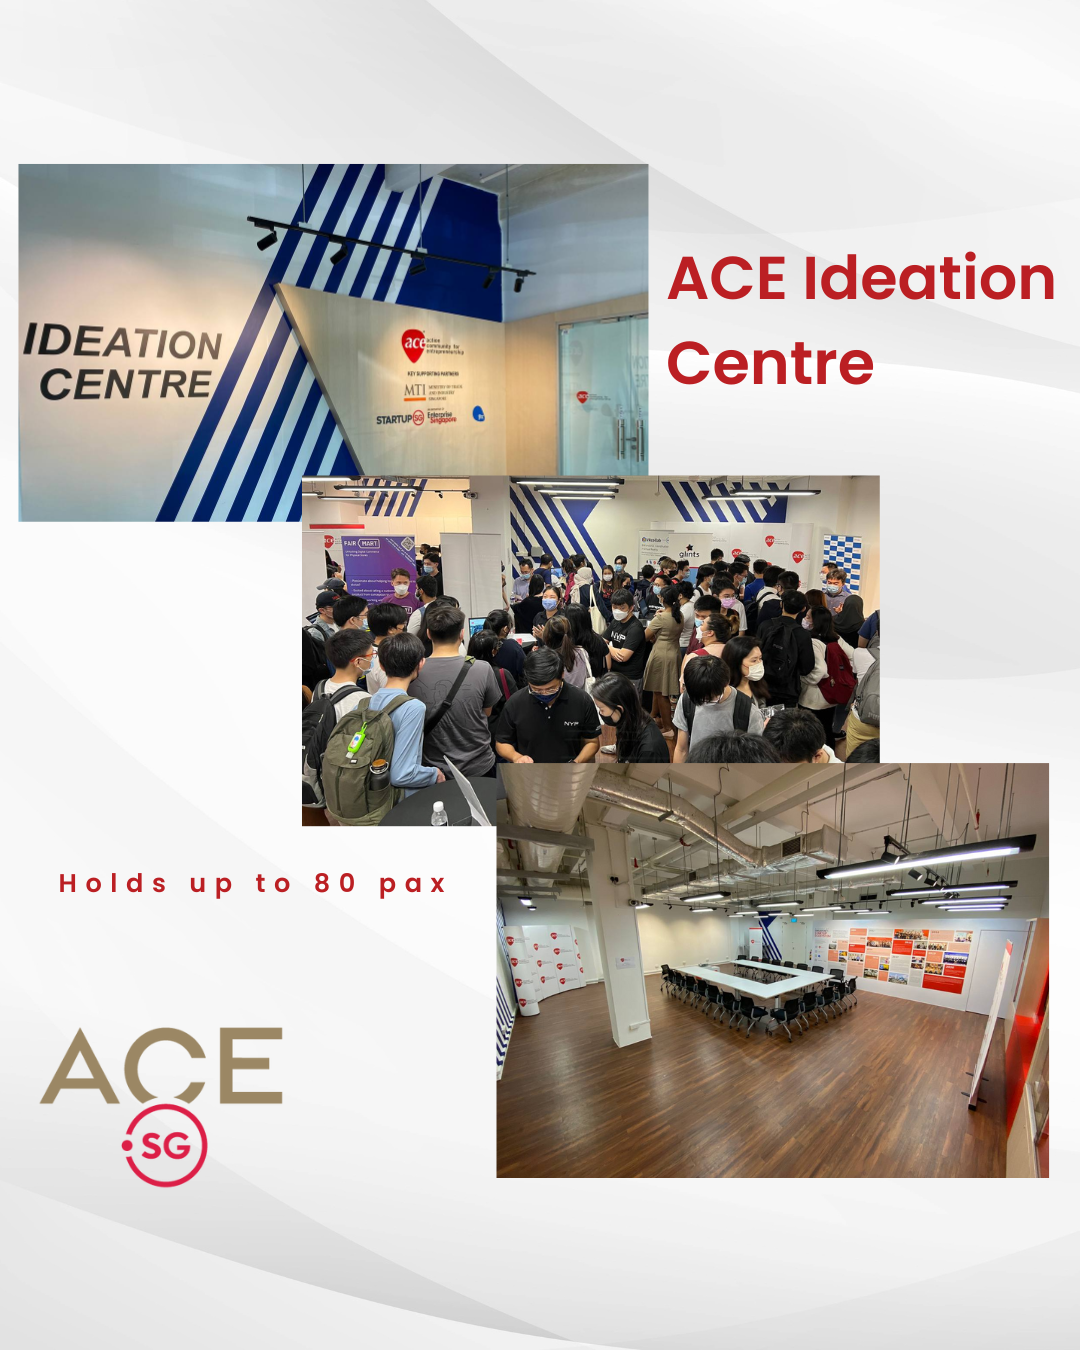 Ideation Centre